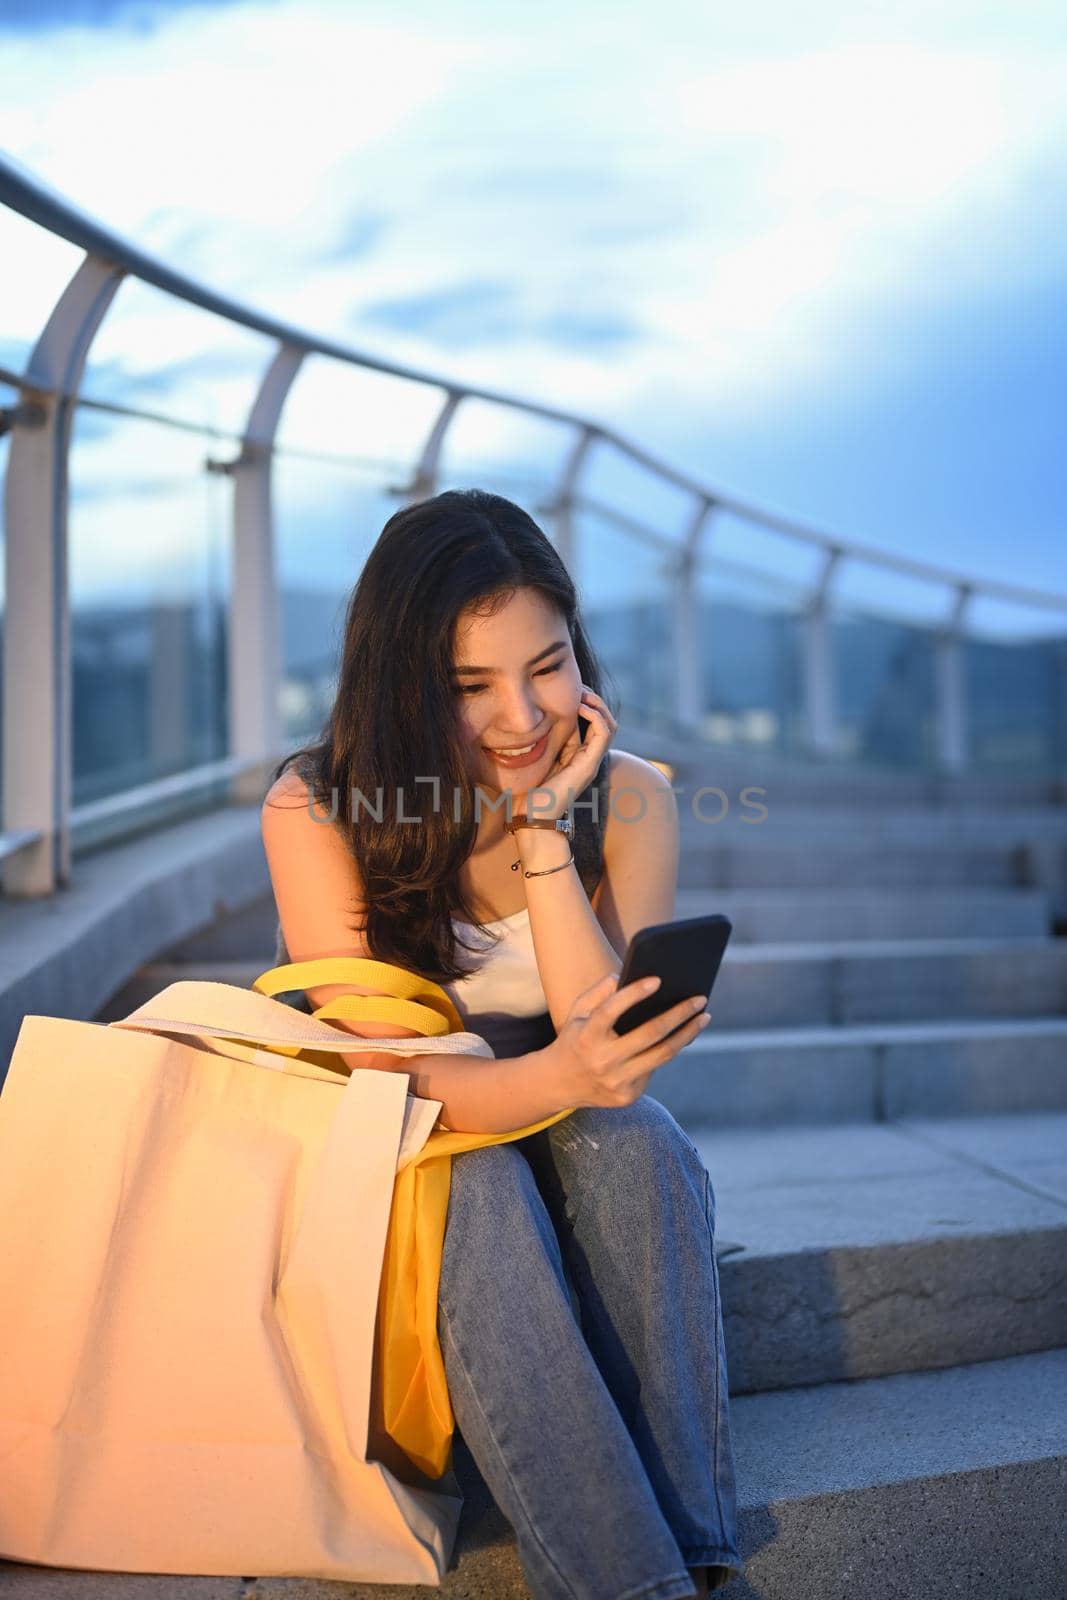 Stylish young woman using mobile phone while sitting on stairs with beautiful evening sky in background.